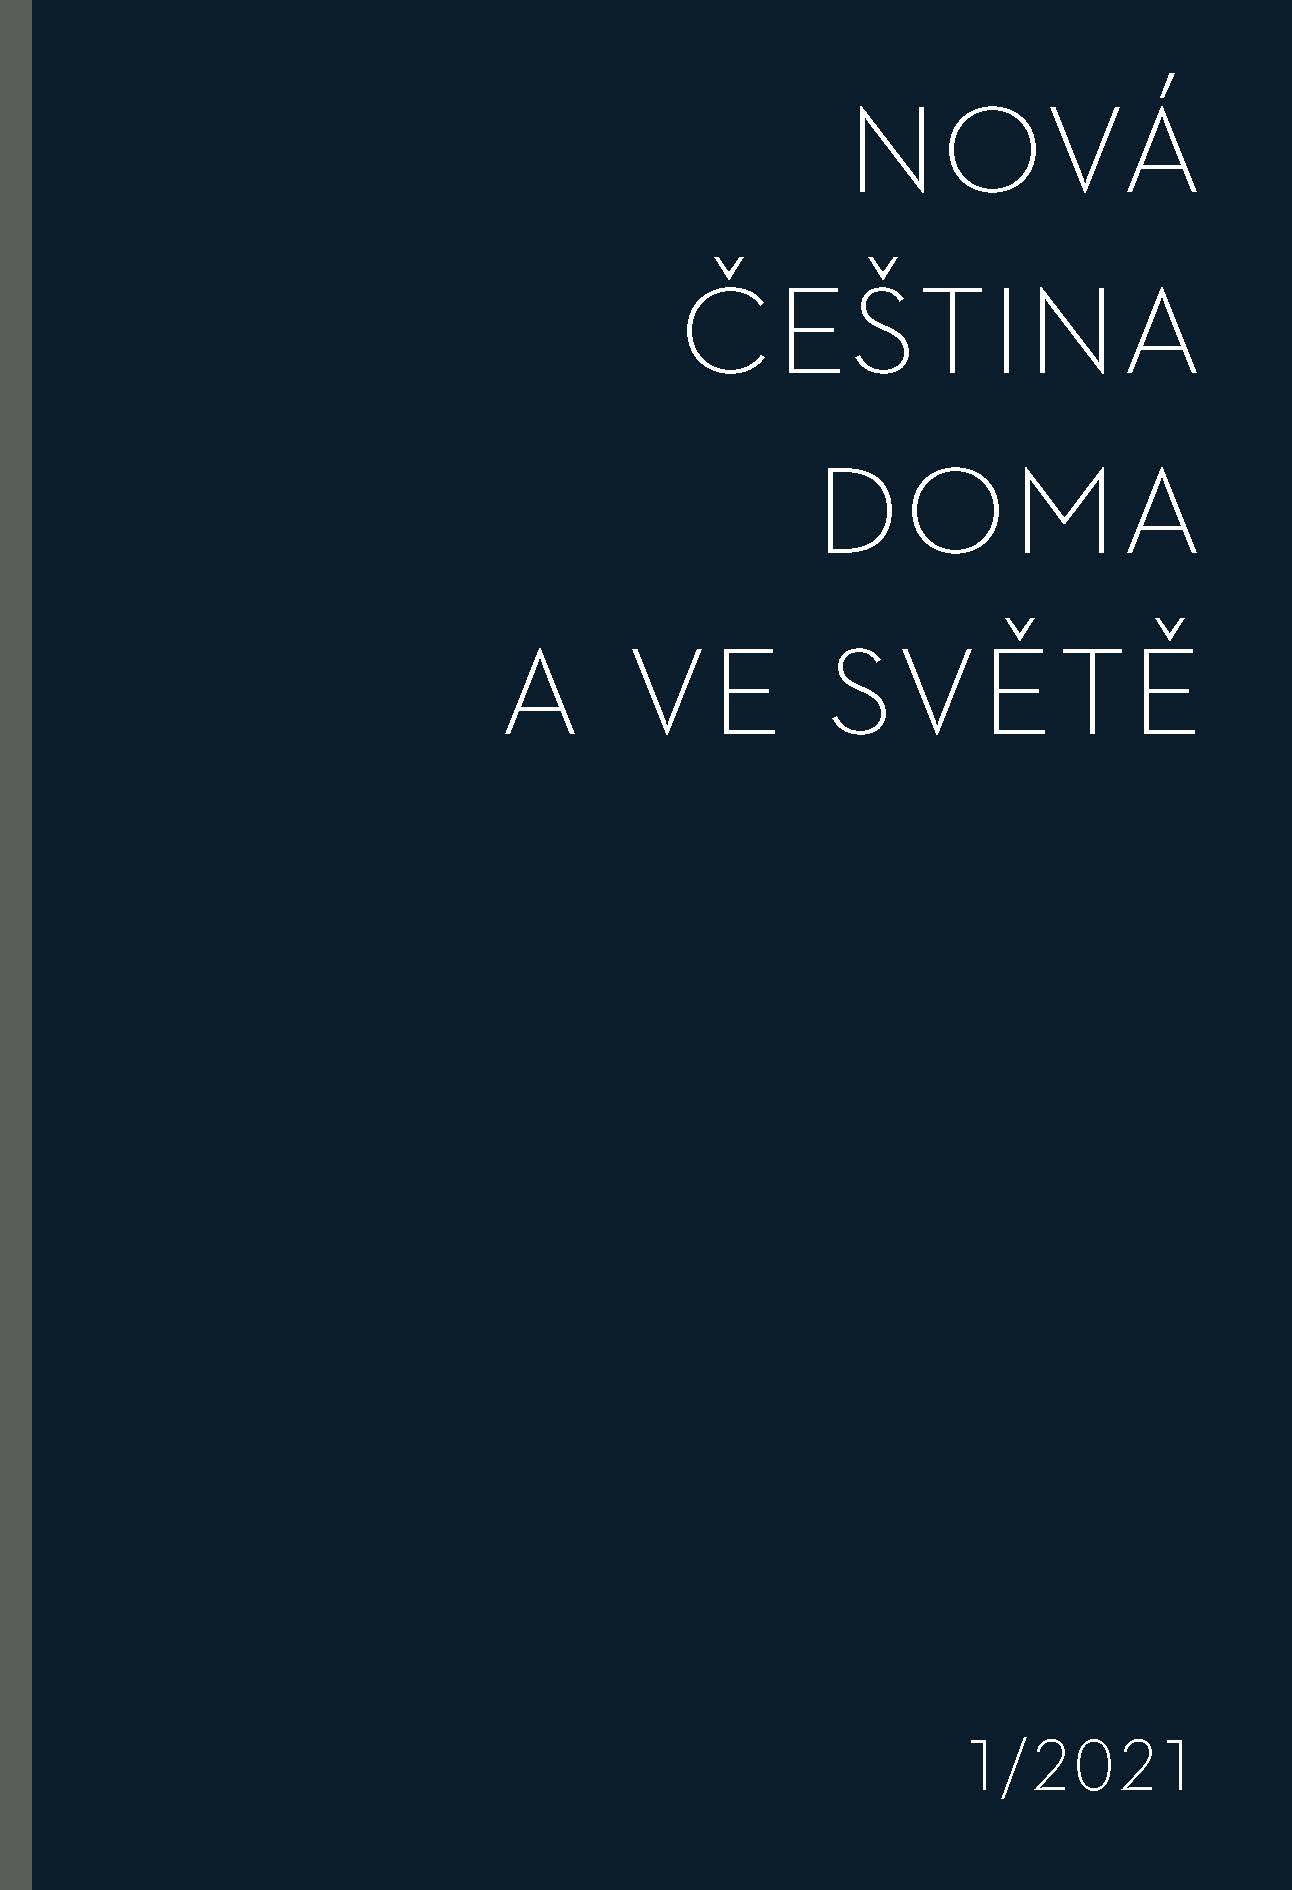 Translation in teaching Czech as a foreign language: Cover Image